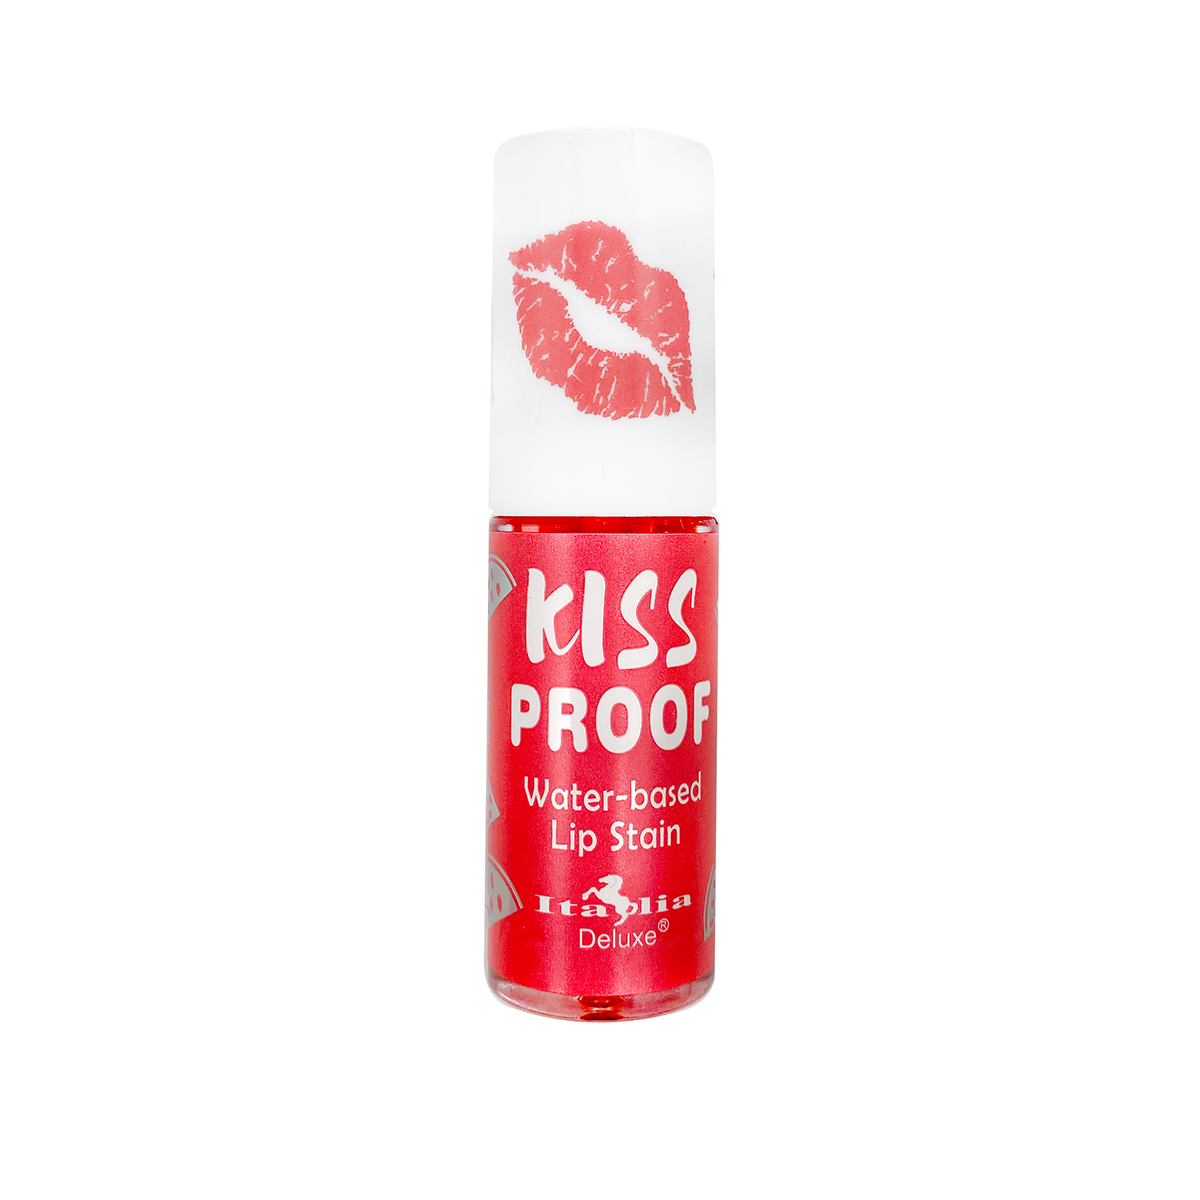 Italia Deluxe Kiss Proof Water Based Lip Stain